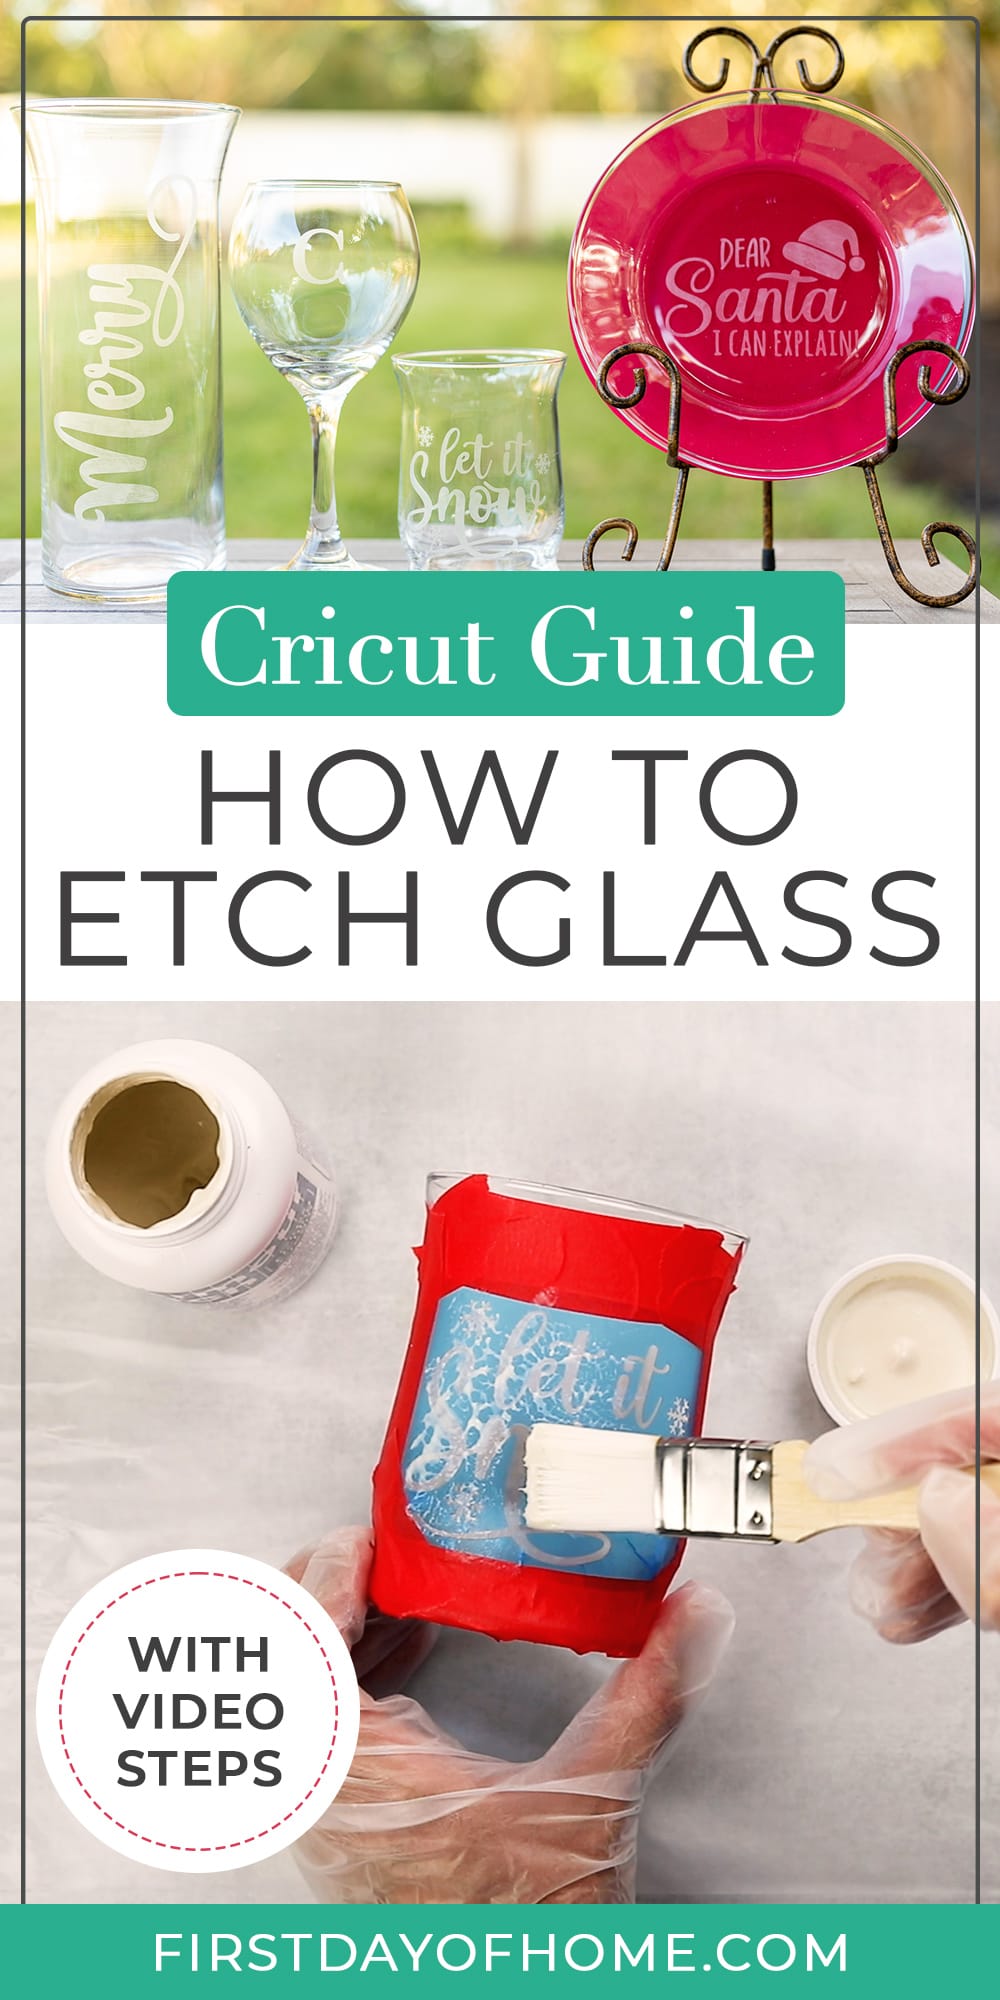 Images of an etched glass plate, wine glass, vase, and candleholder and image showing glass etching process. Text overlay reads "Cricut Guide - How to Etch Glass"